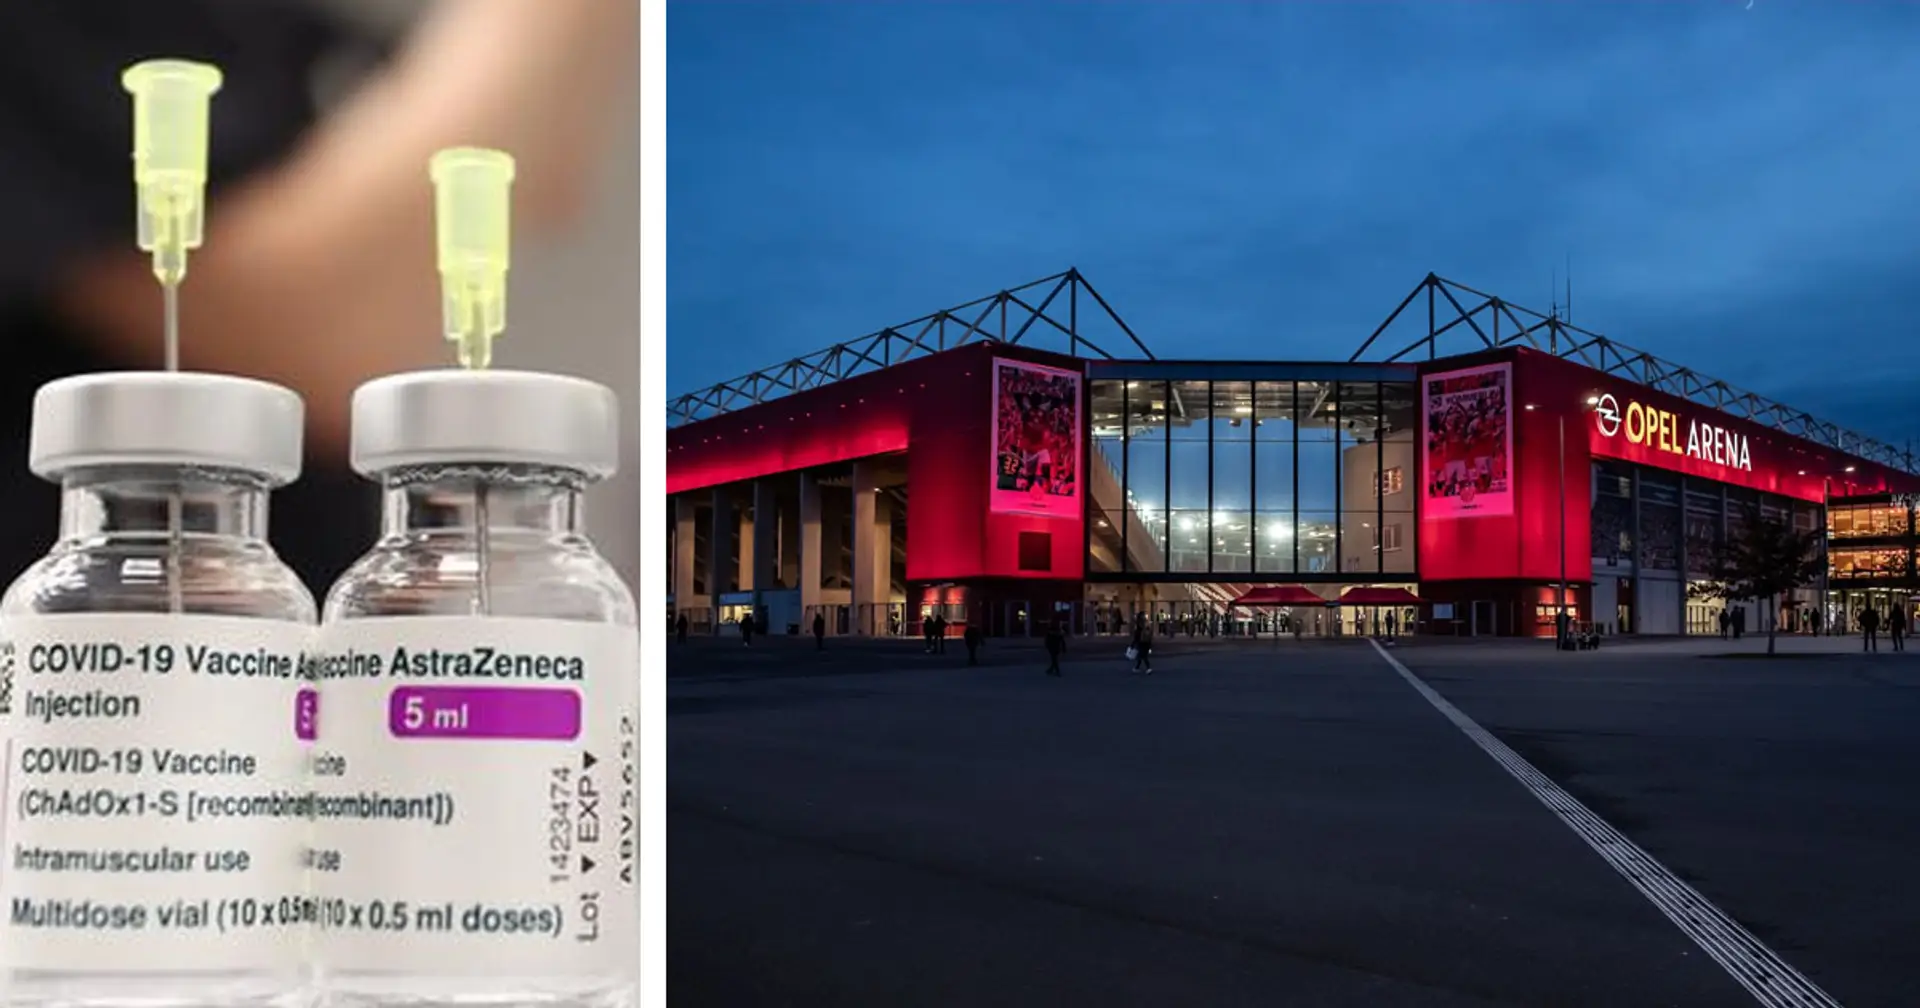 Bundesliga side Mainz confirm they won't sign any players who refuse Covid-19 vaccine